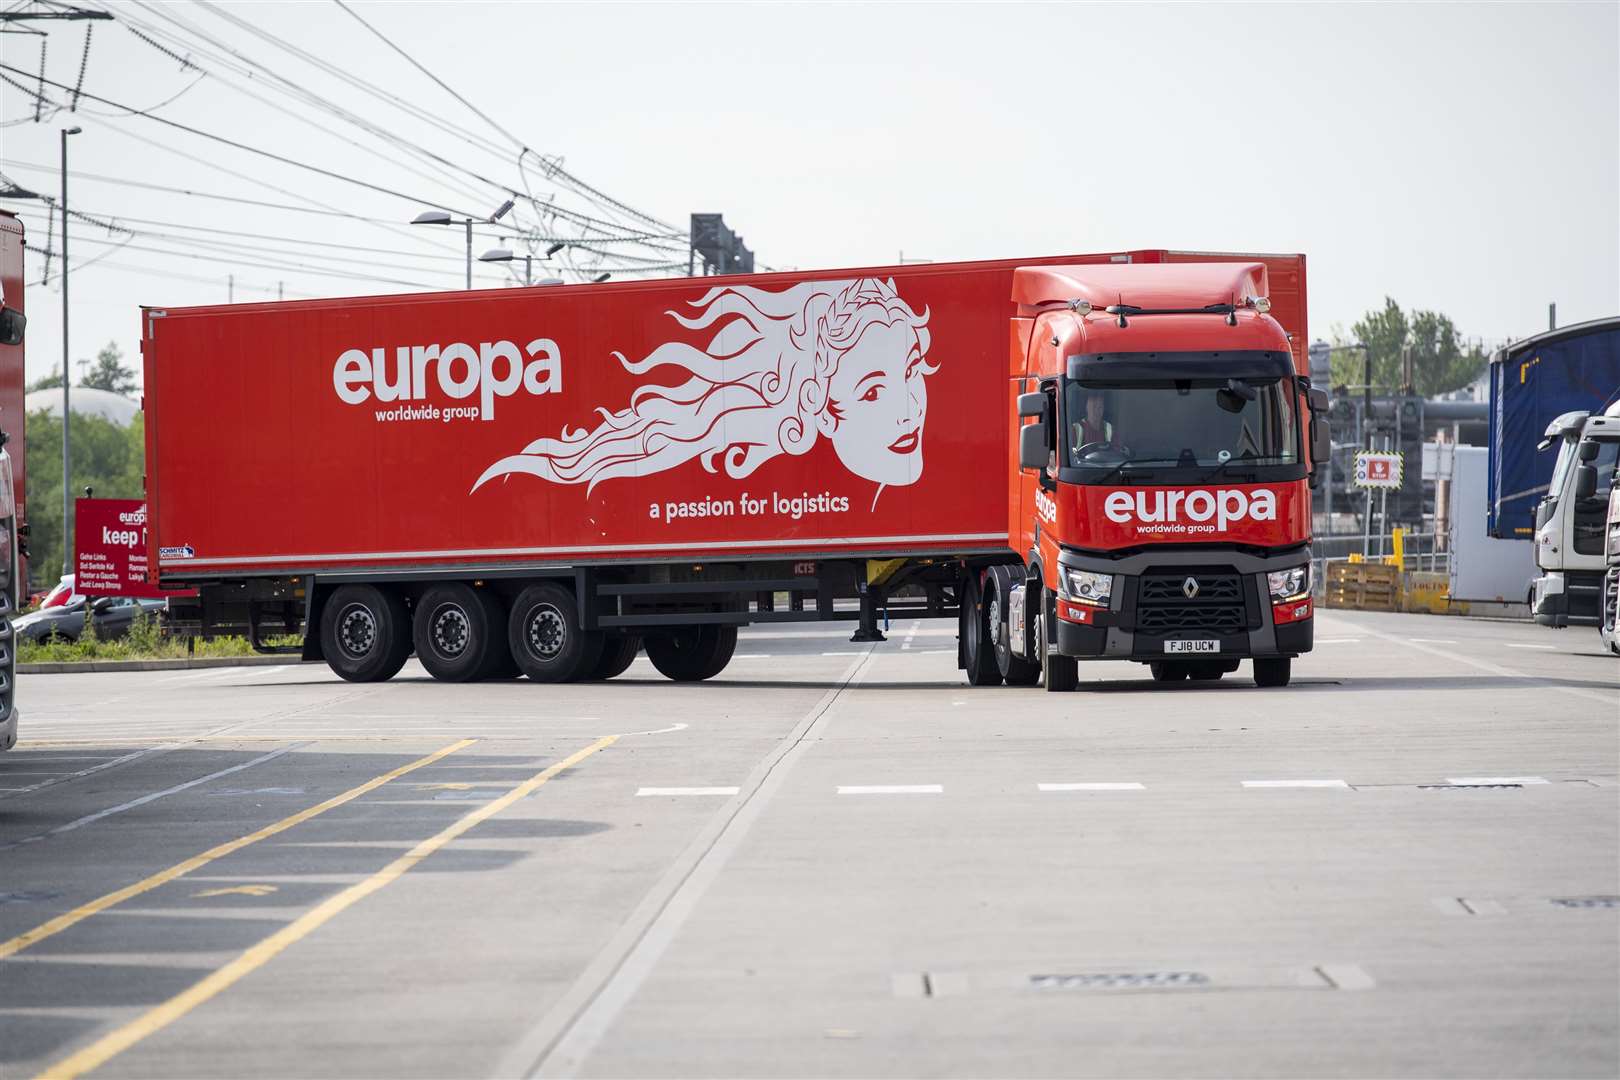 Kent firm Europa recently launched its own driving academy to help ease the crisis